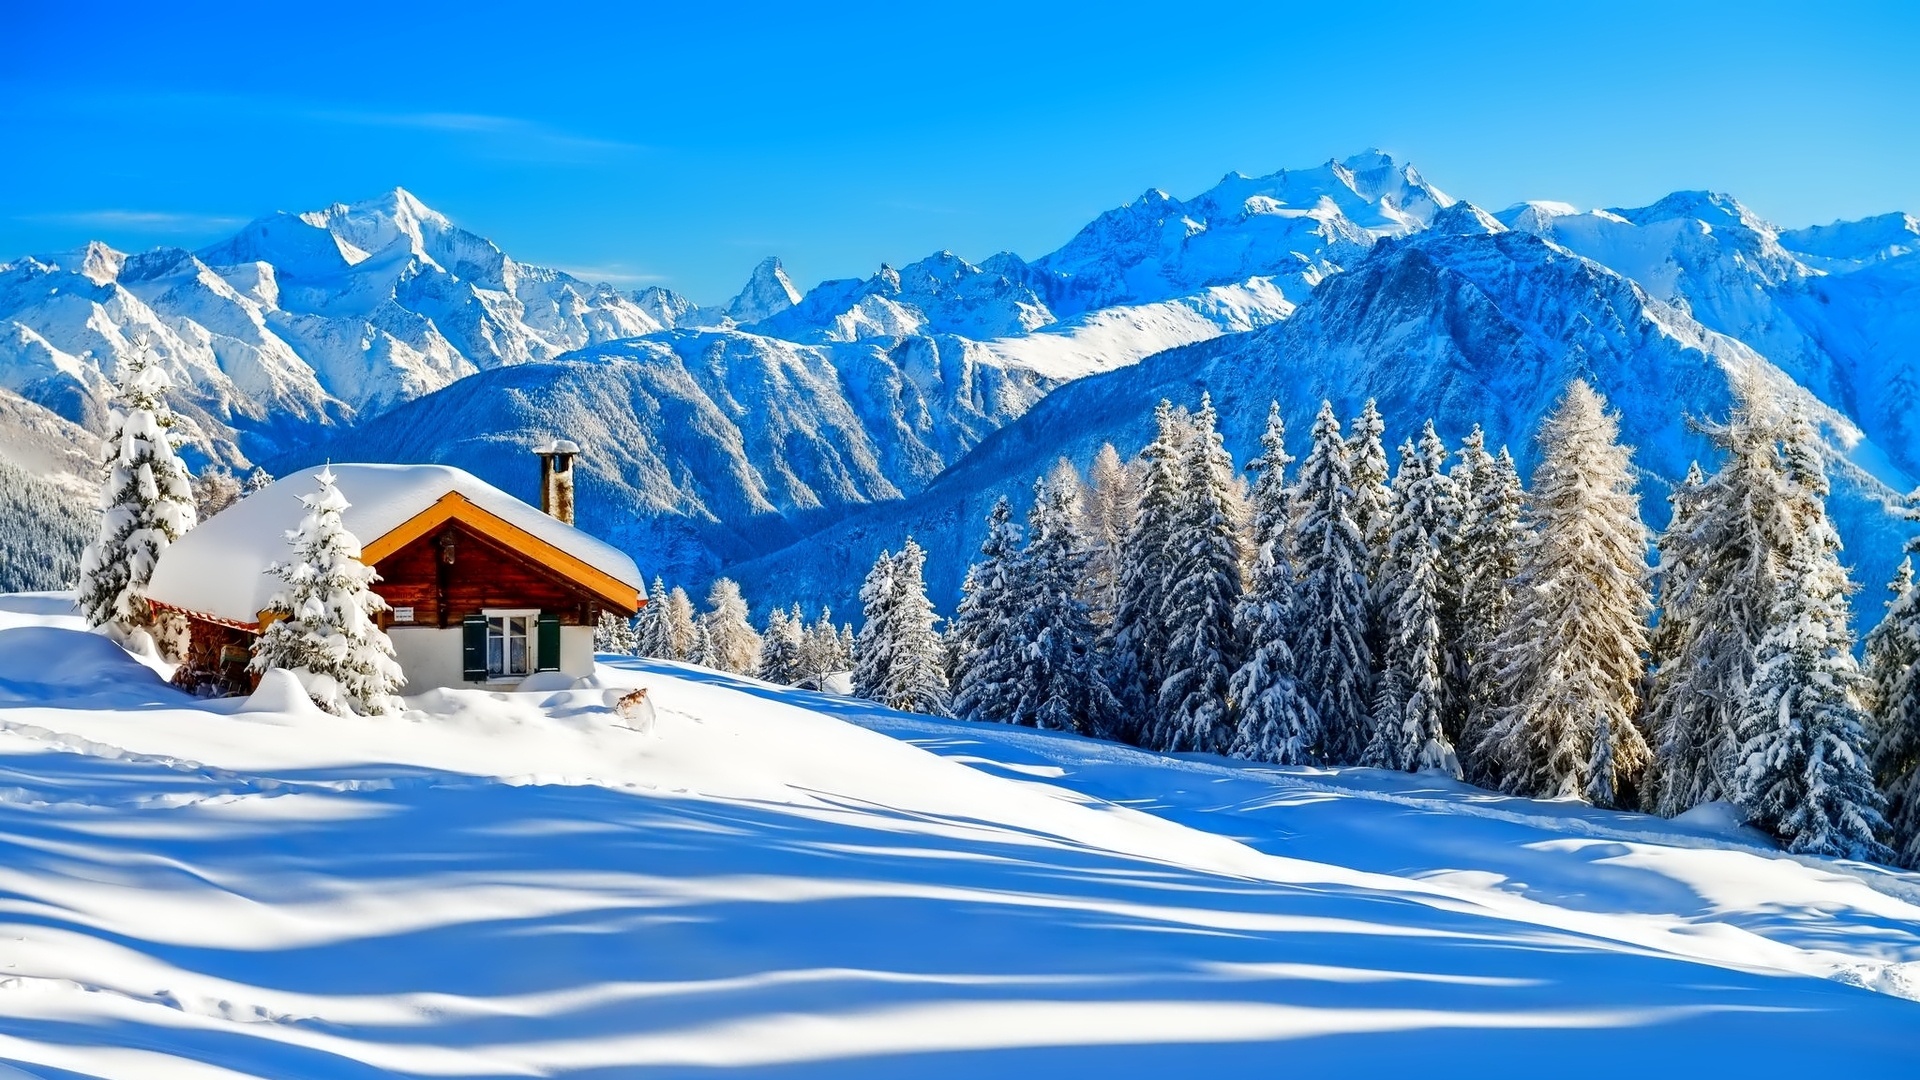 Snow Wallpapers HD